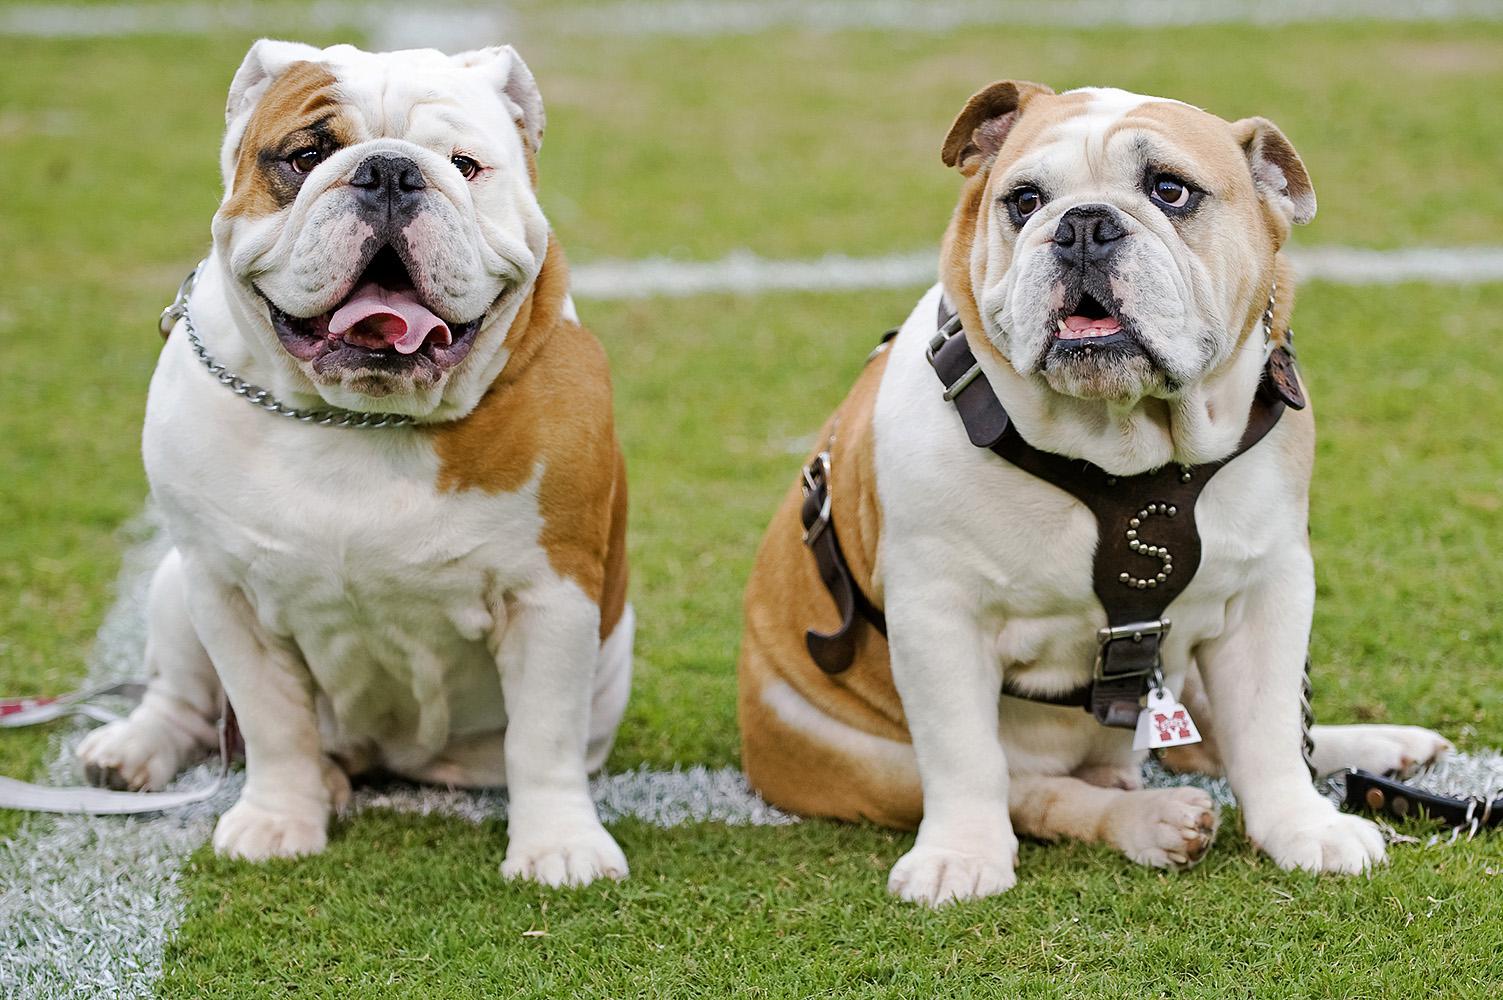 Champ, left, Mississippi State University's new Bully XX, sits on the Scott Field athletic turf with Bully XIX, his father, Tonka. (Photo by MSU University Relations/Kristen Hines Baker)